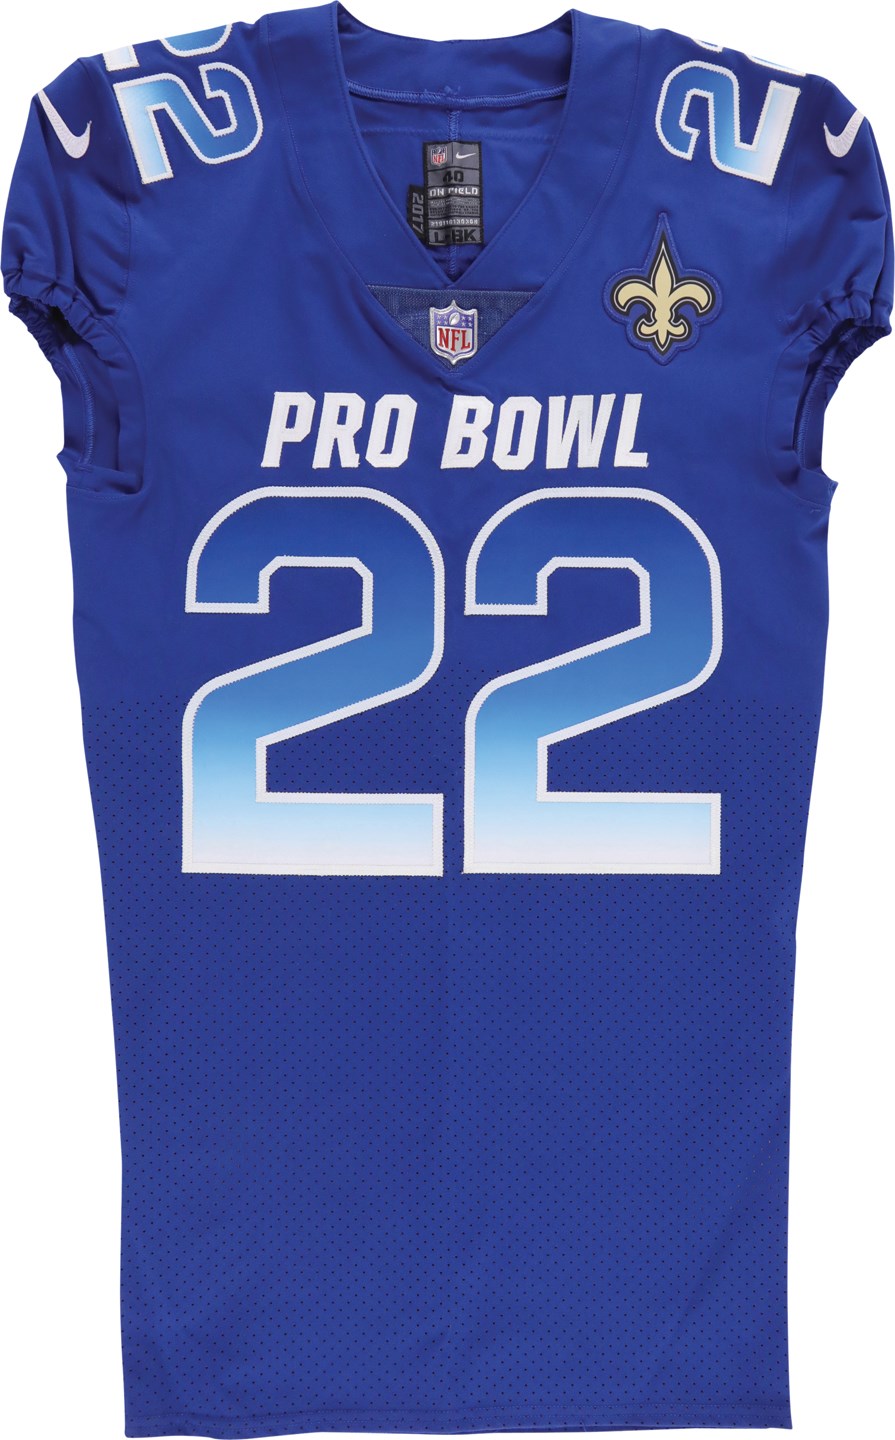 - 2017 Mark Ingram Game Worn Pro Bowl Jersey Signed and Swapped with Adrian Peterson (PSA)